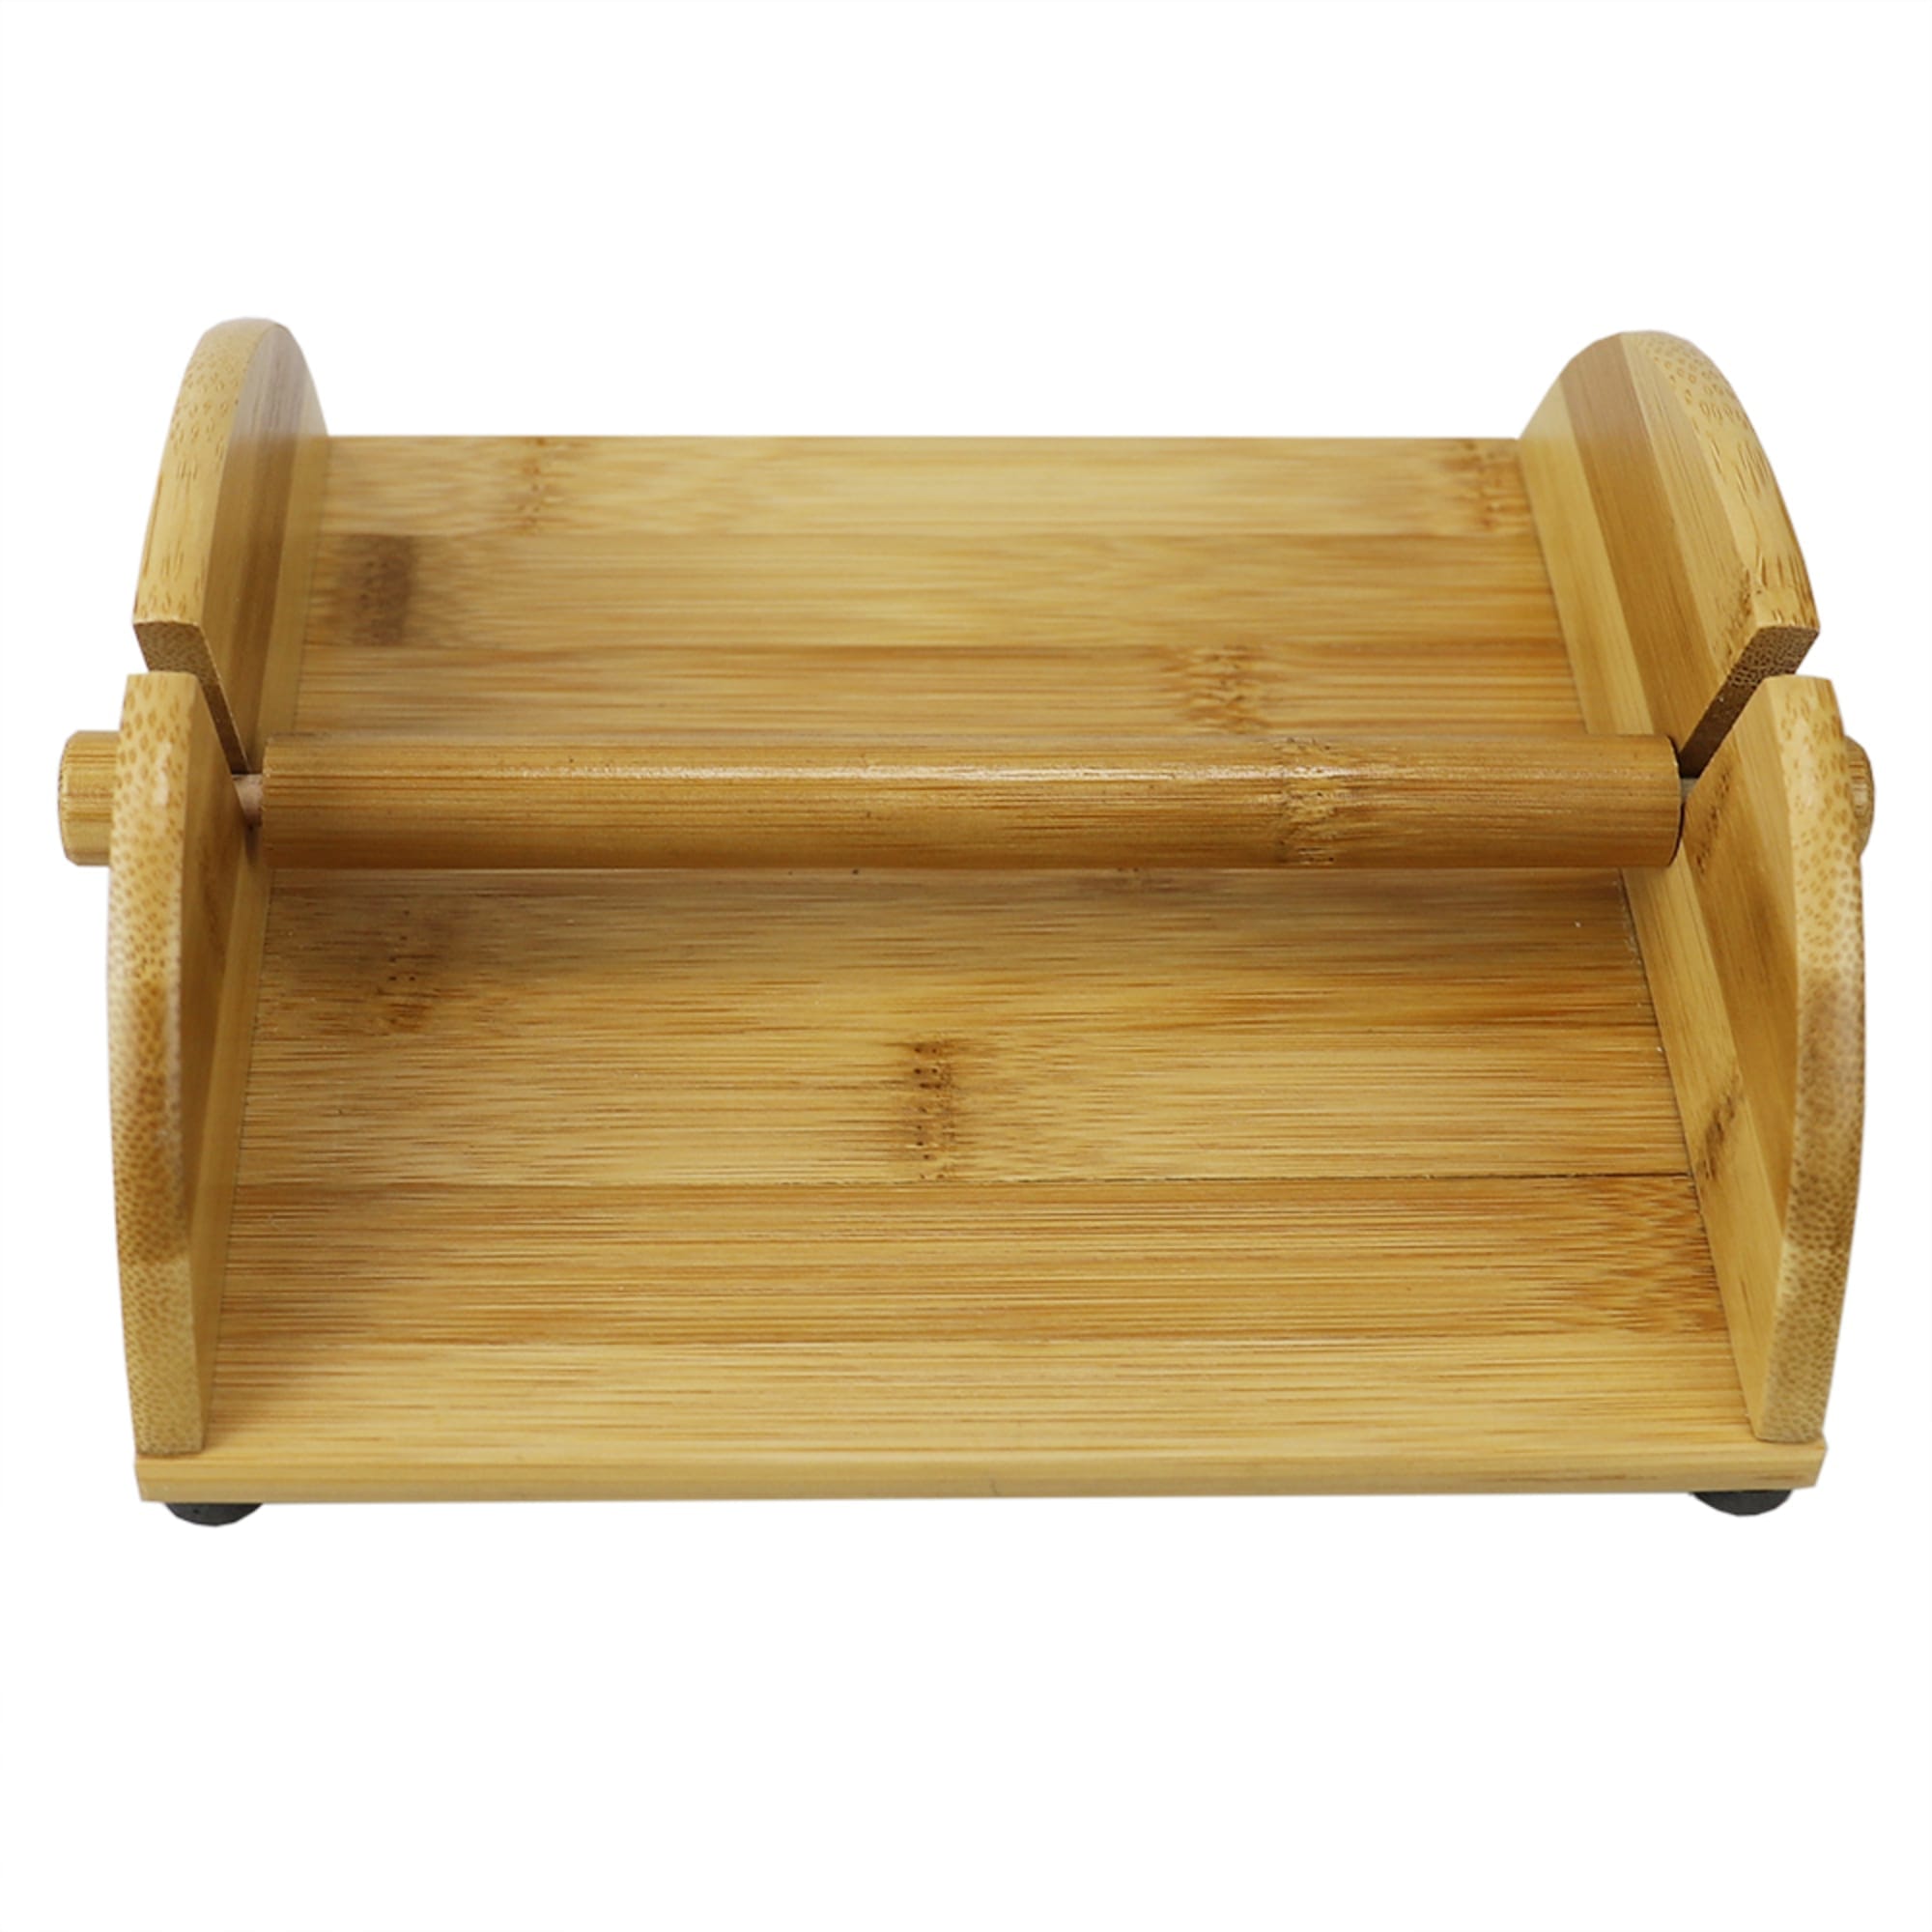 Home Basics Flat Bamboo Napkin Holder with Weighted Arm, Natural $5.00 EACH, CASE PACK OF 12